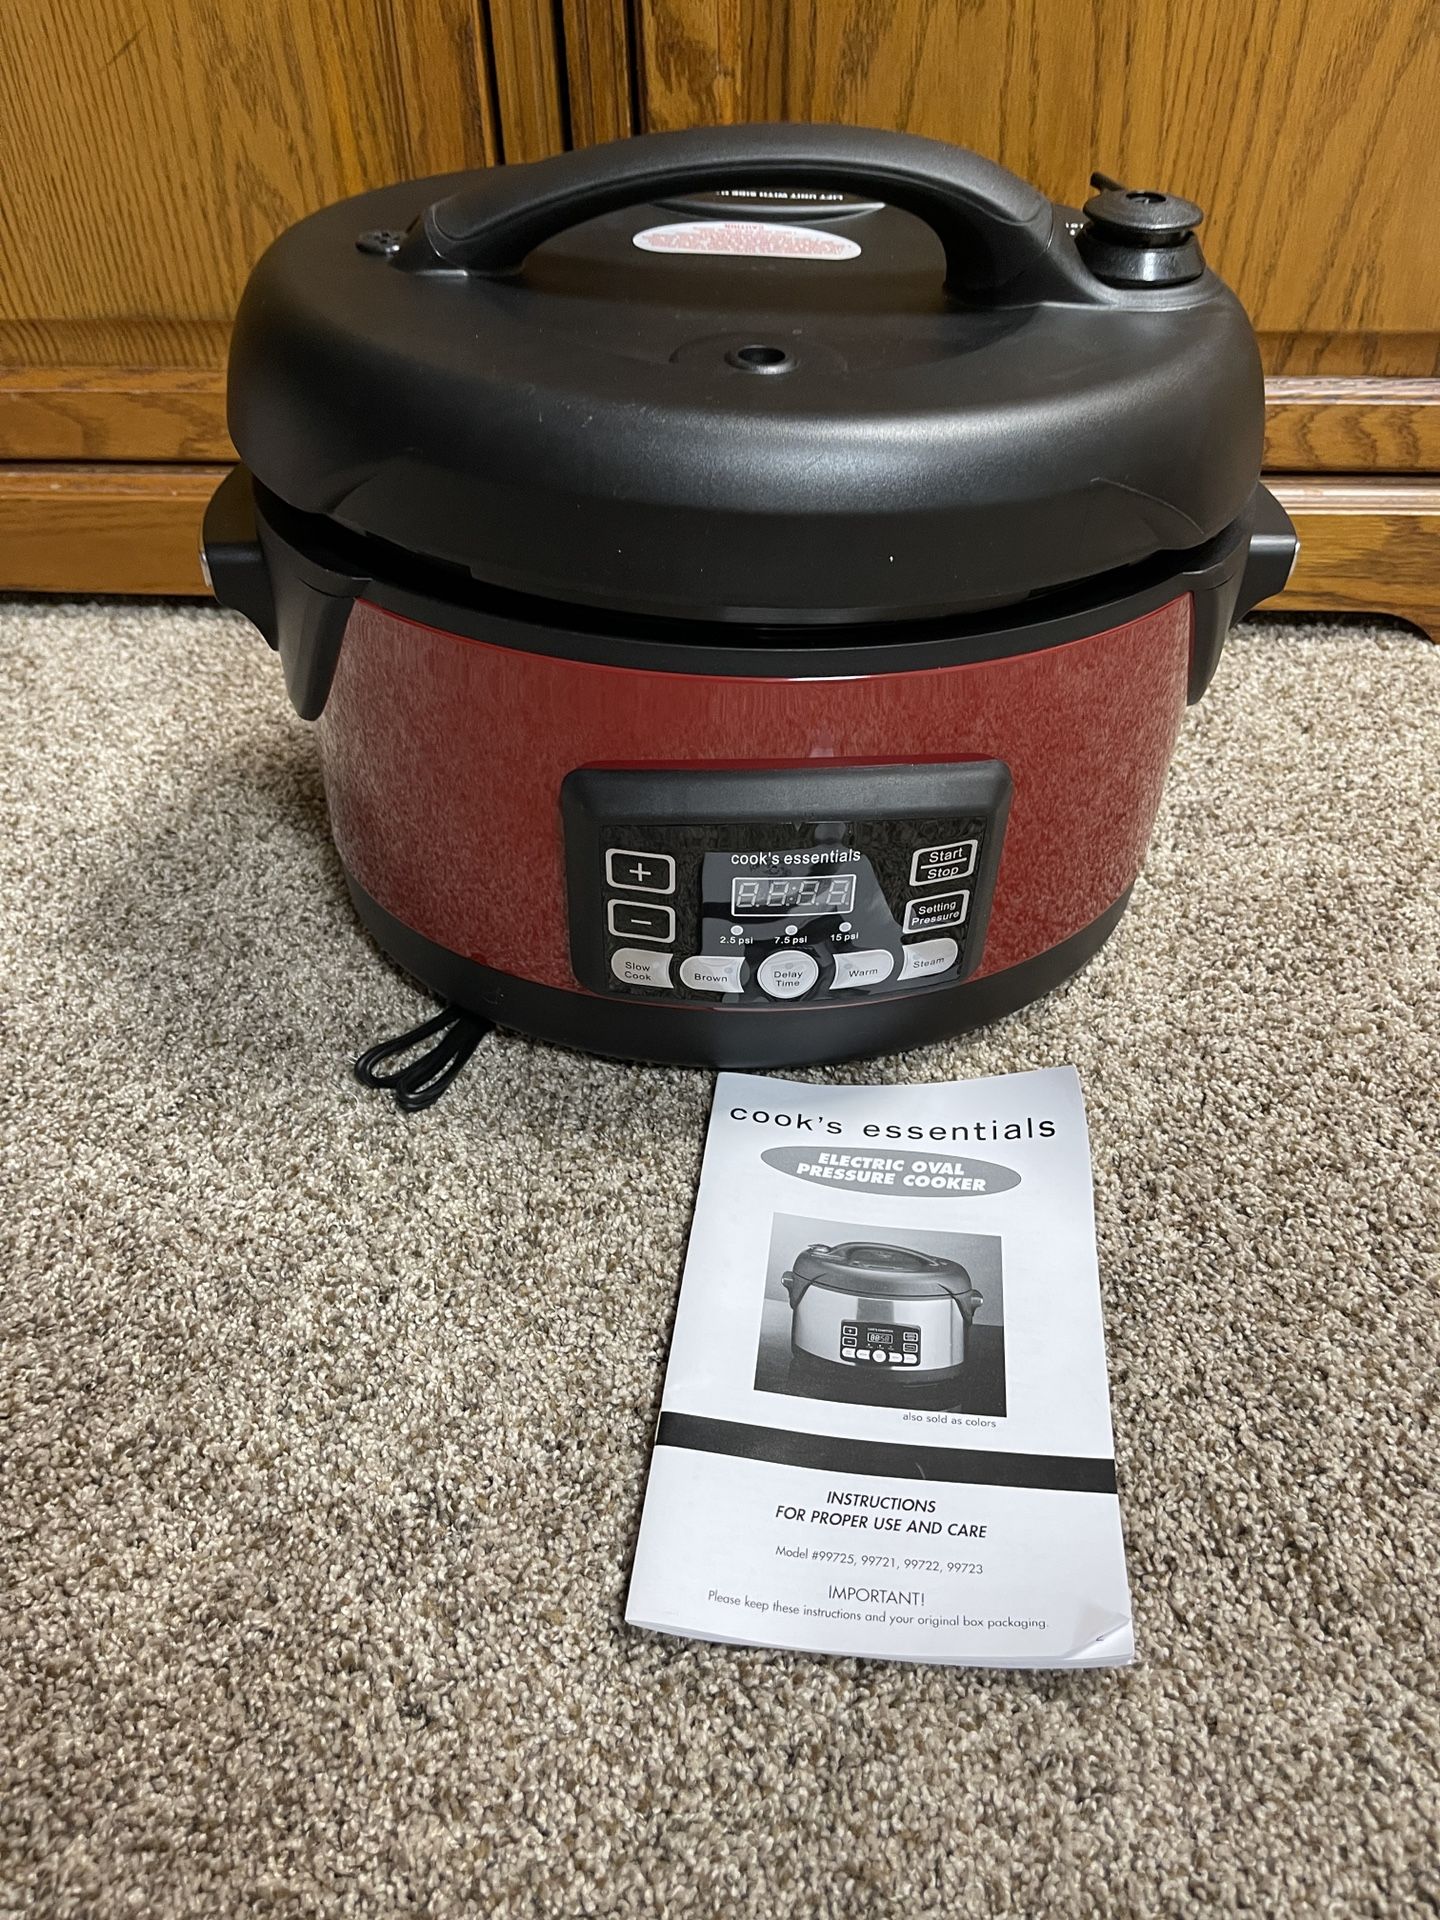 Cook’s Essentials 99725 5qt Electric Oval PressureCooker Red BRAND NEW ***MAKE A OFFER*** Needs To Go